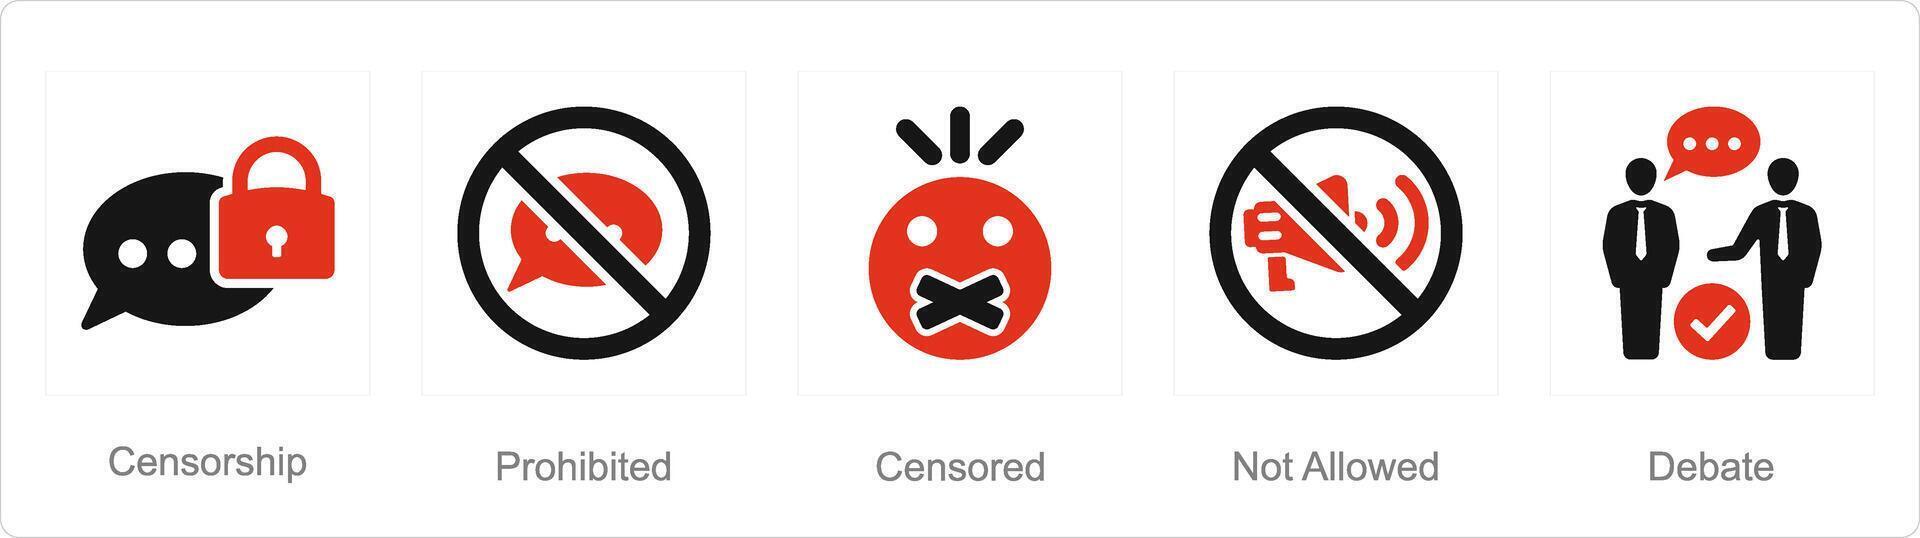 A set of 5 Freedom of Speech icons as censorship, prohibited, censored vector